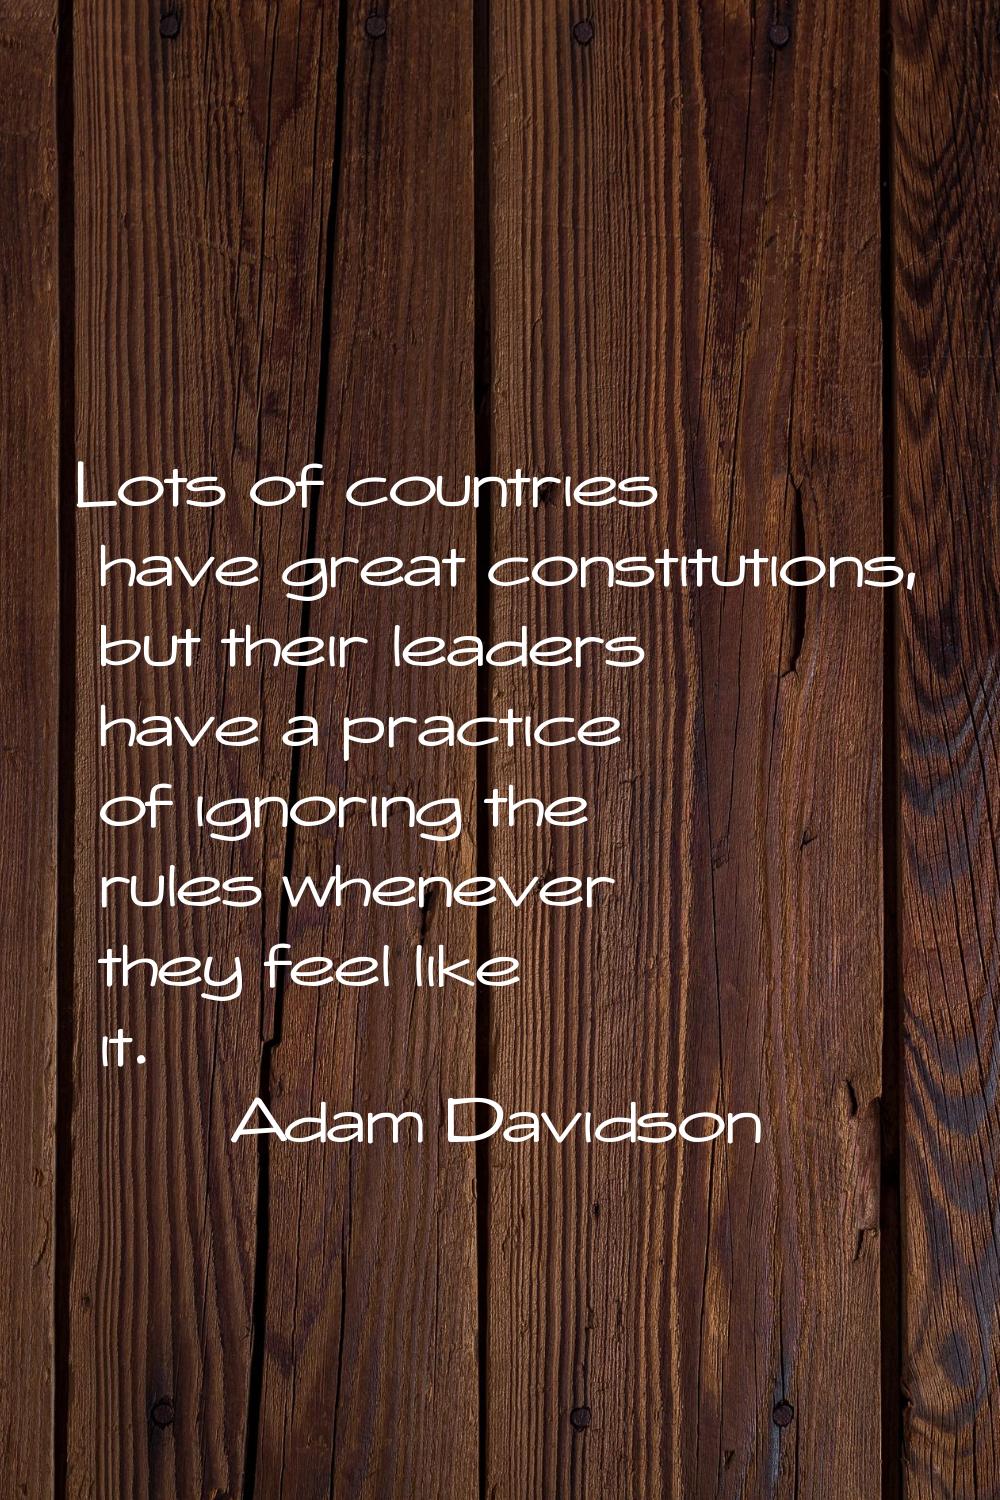 Lots of countries have great constitutions, but their leaders have a practice of ignoring the rules